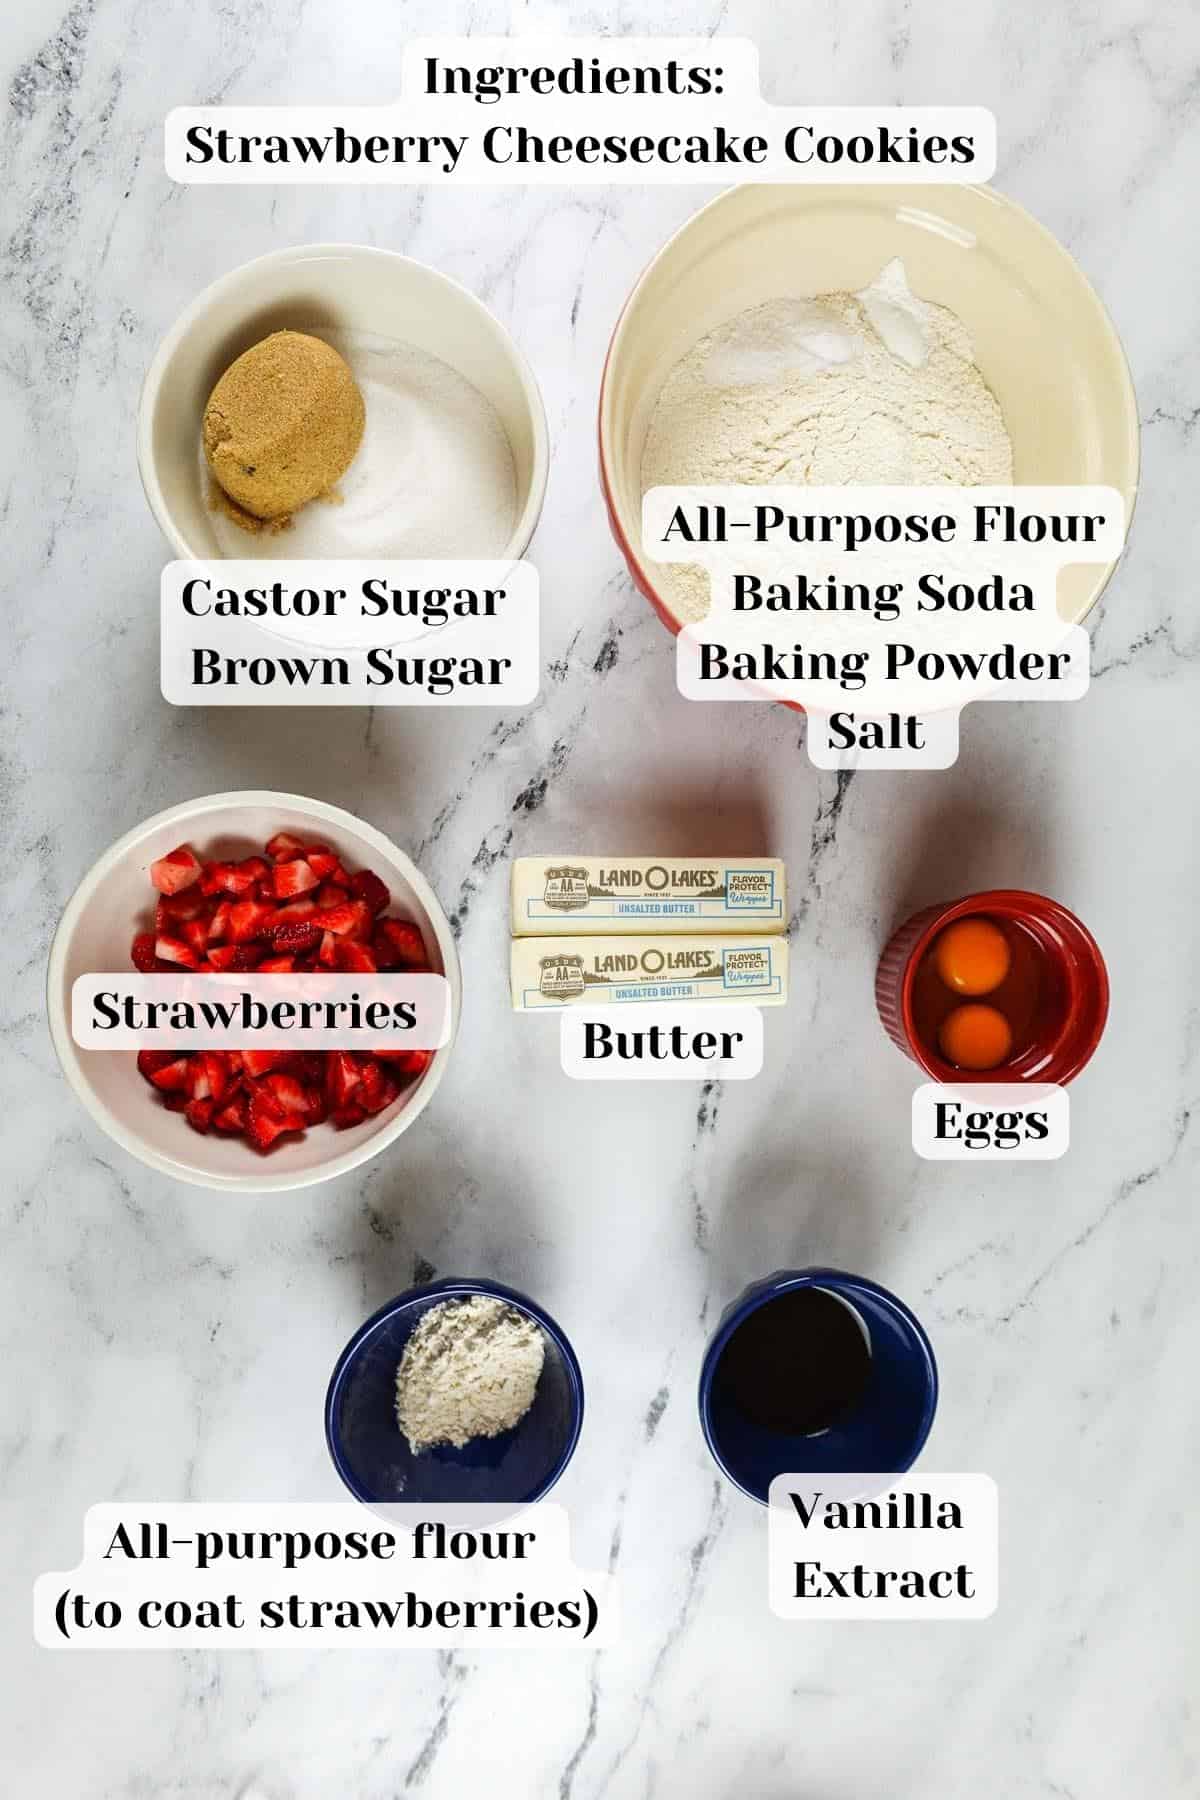 ingredients for strawberry cheesecake cookies placed on the table.